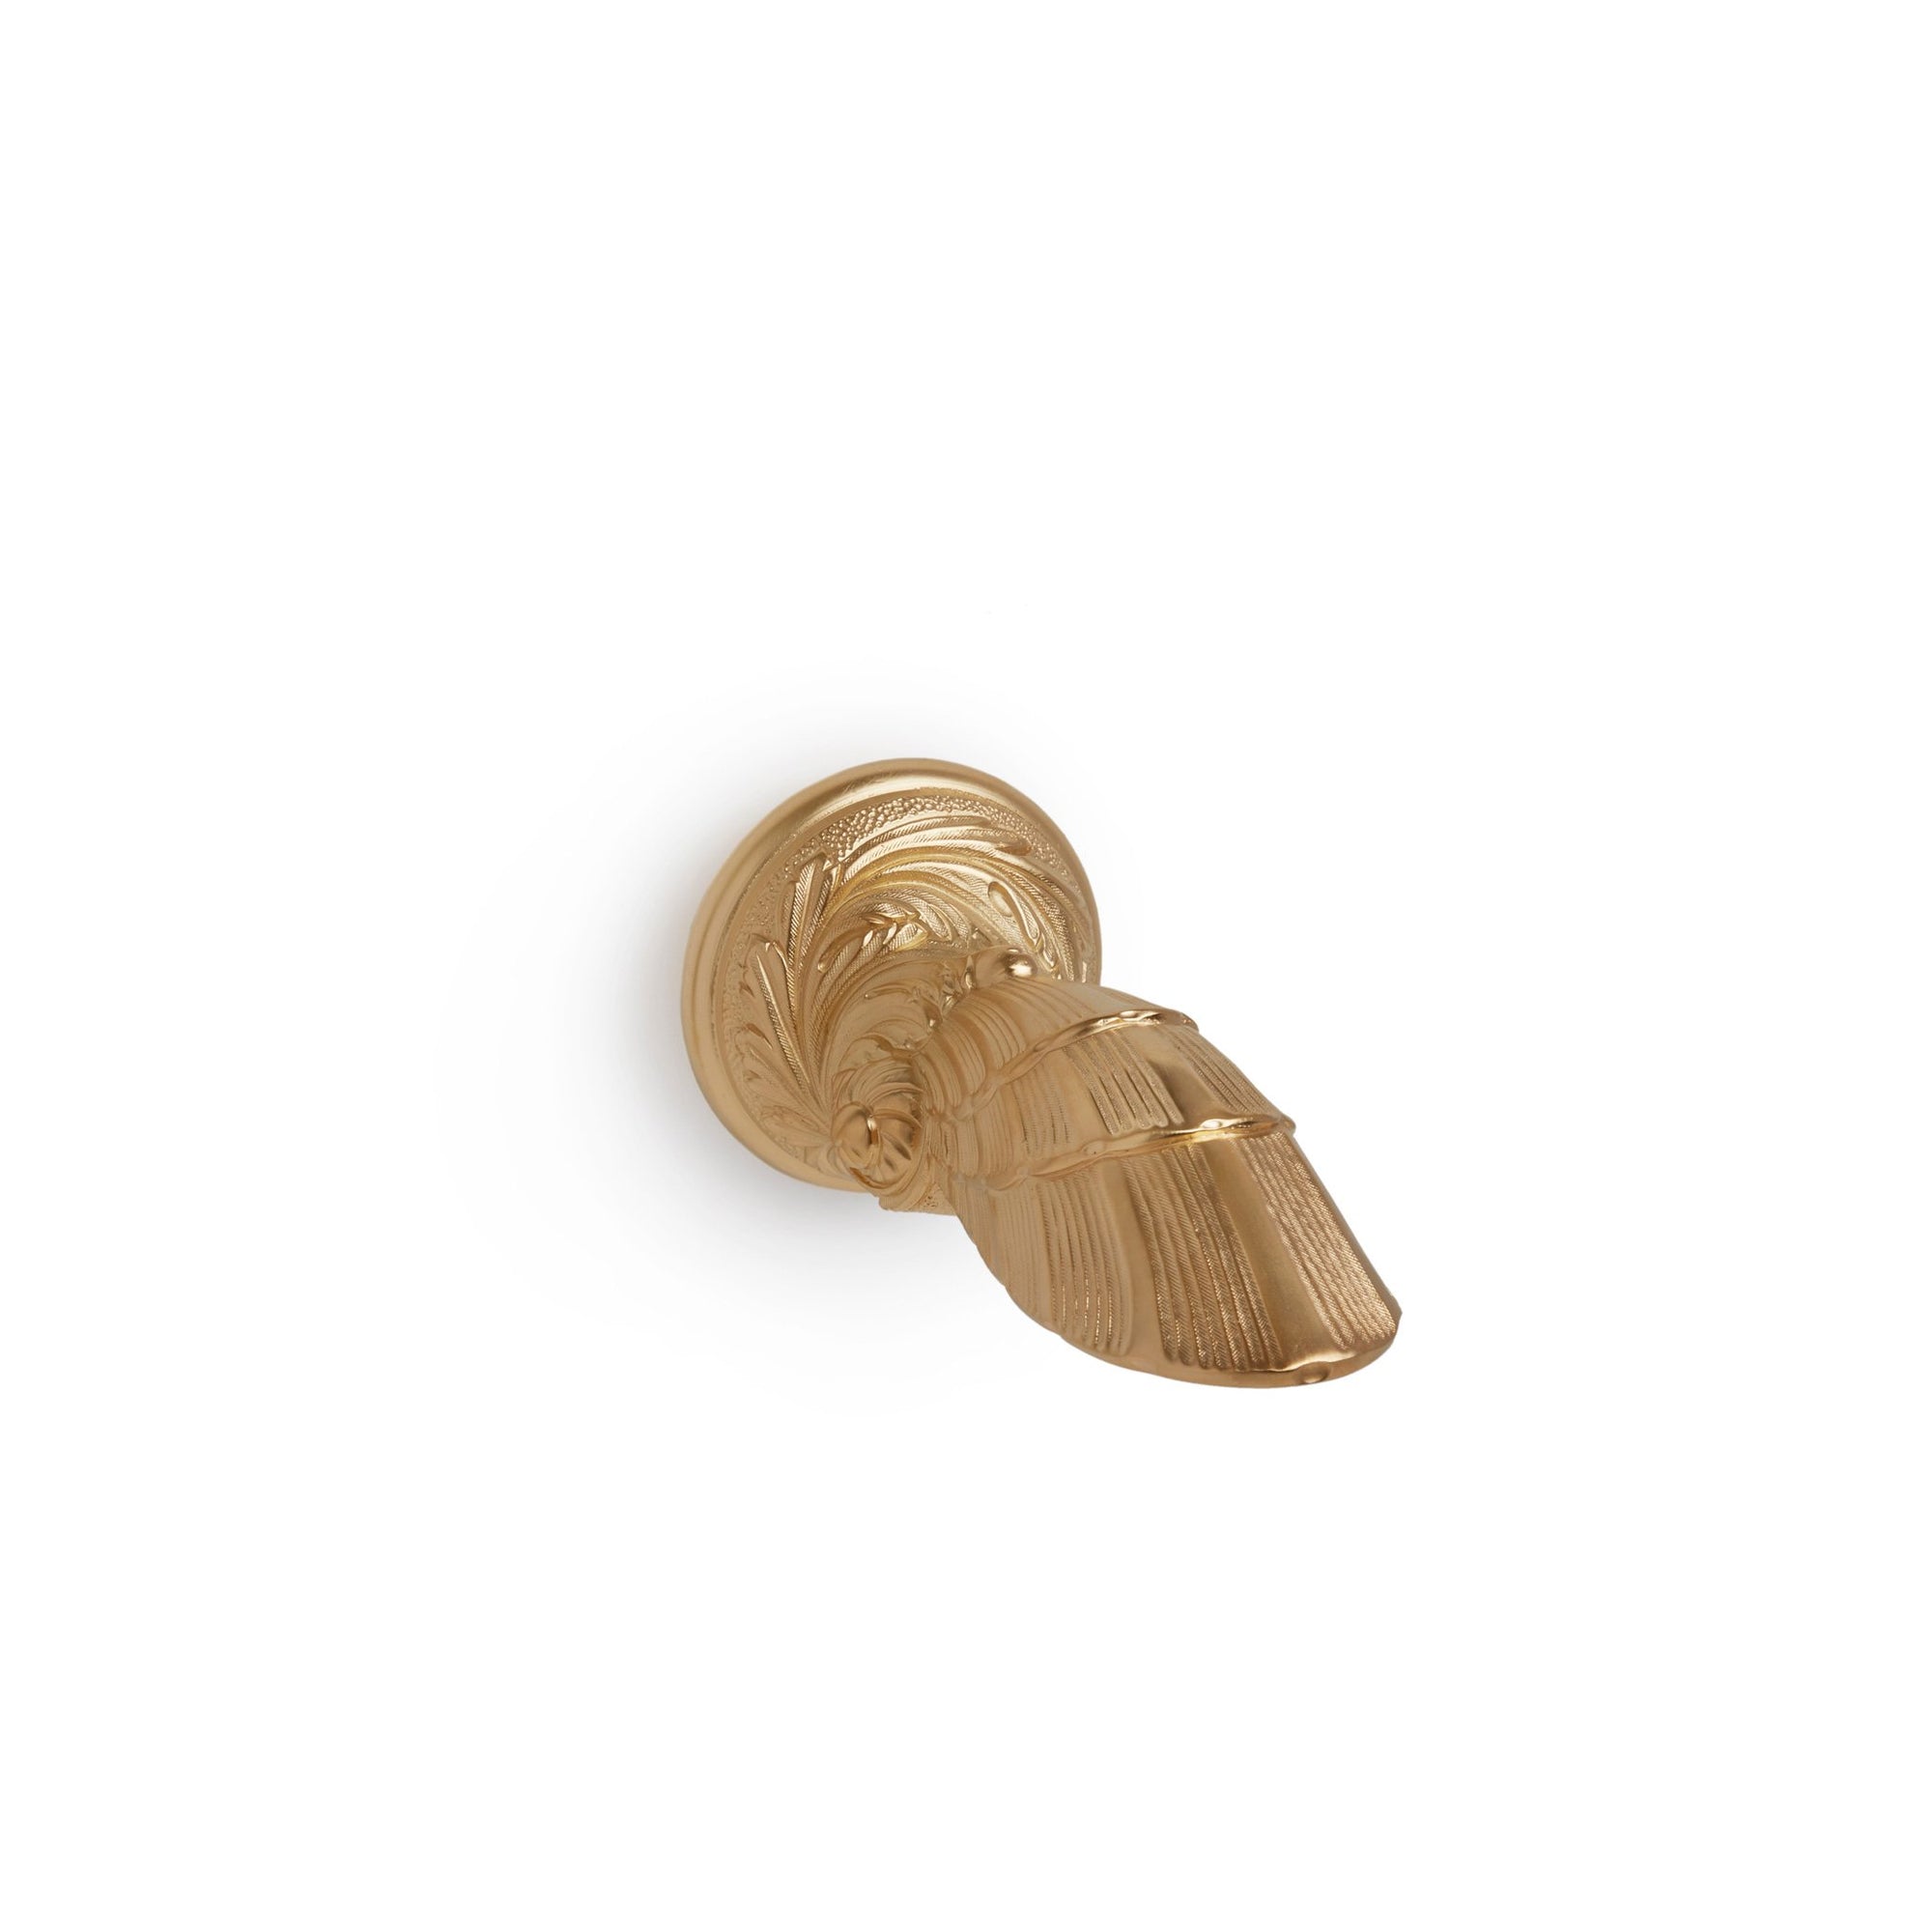 0815TUB-GP Sherle Wagner International Shell Wall Mount Tub Spout in Gold Plate metal finish